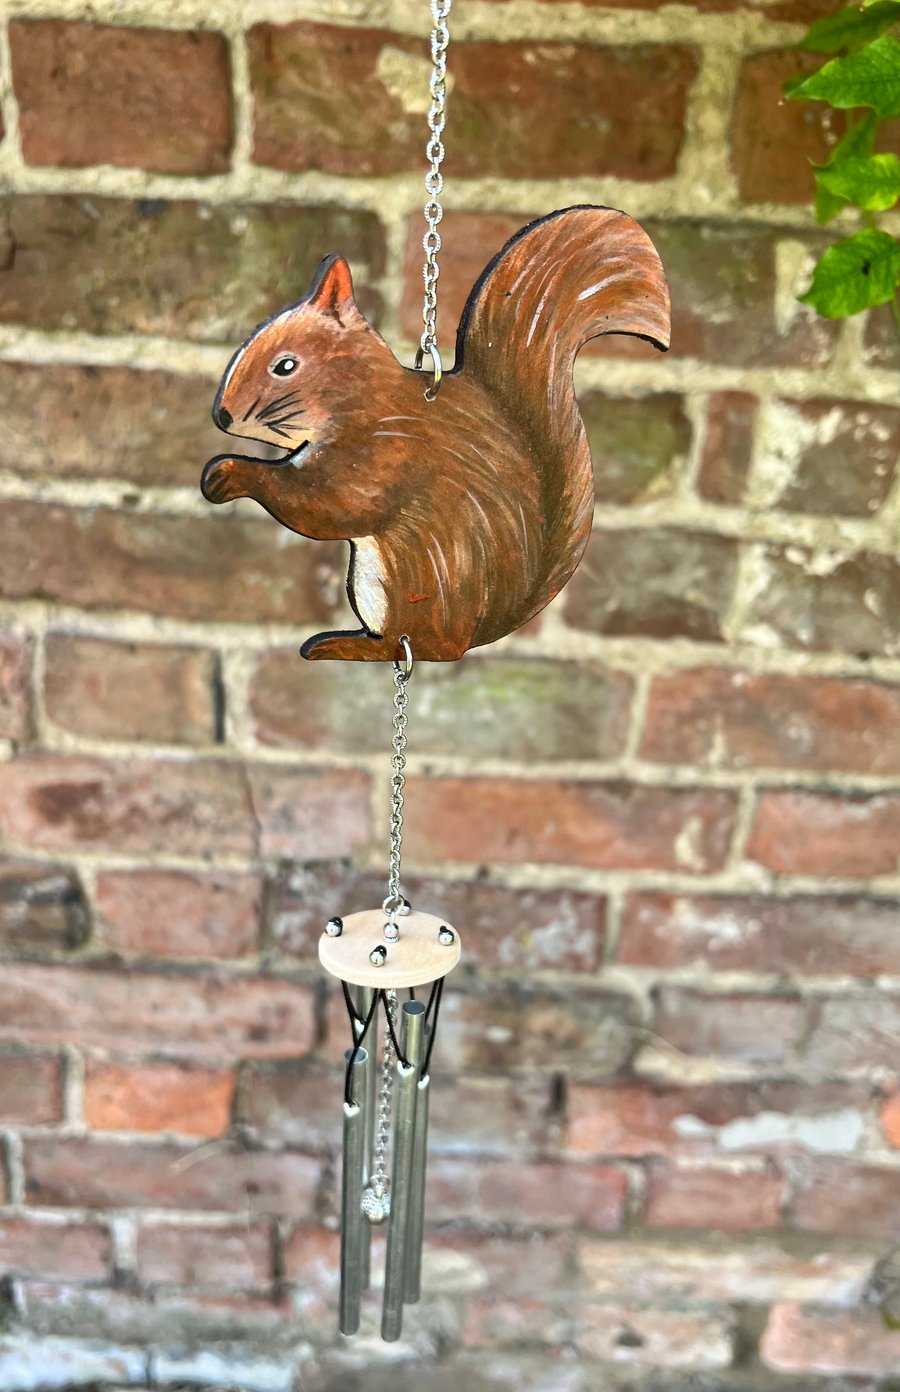 Red squirrel wind chime with aluminum chimes and a metal acorn striker 